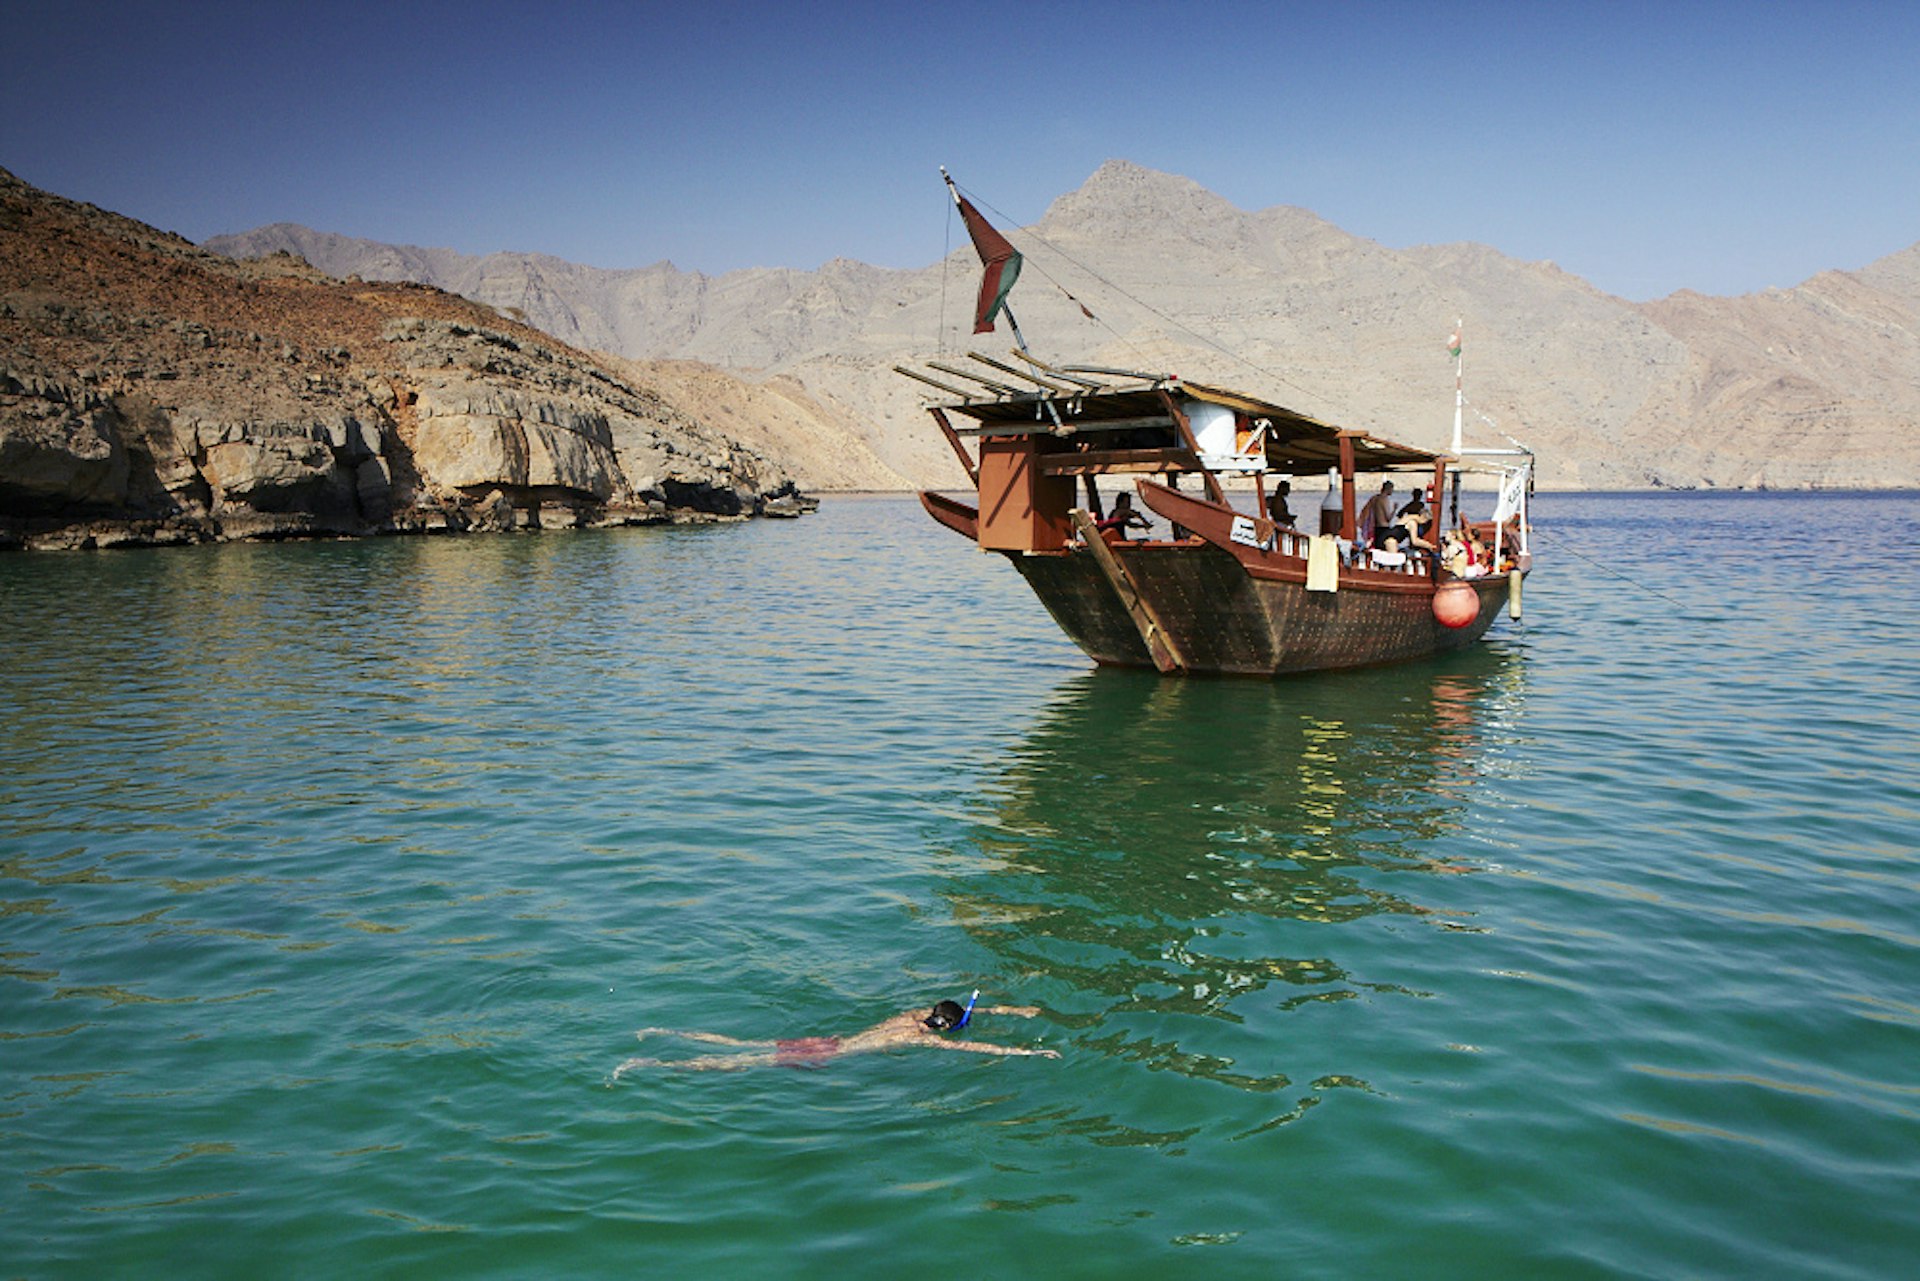 A man snorkels in front of a large wooden tourist boat in turquoise waters surrounded by sand-colored cliffs